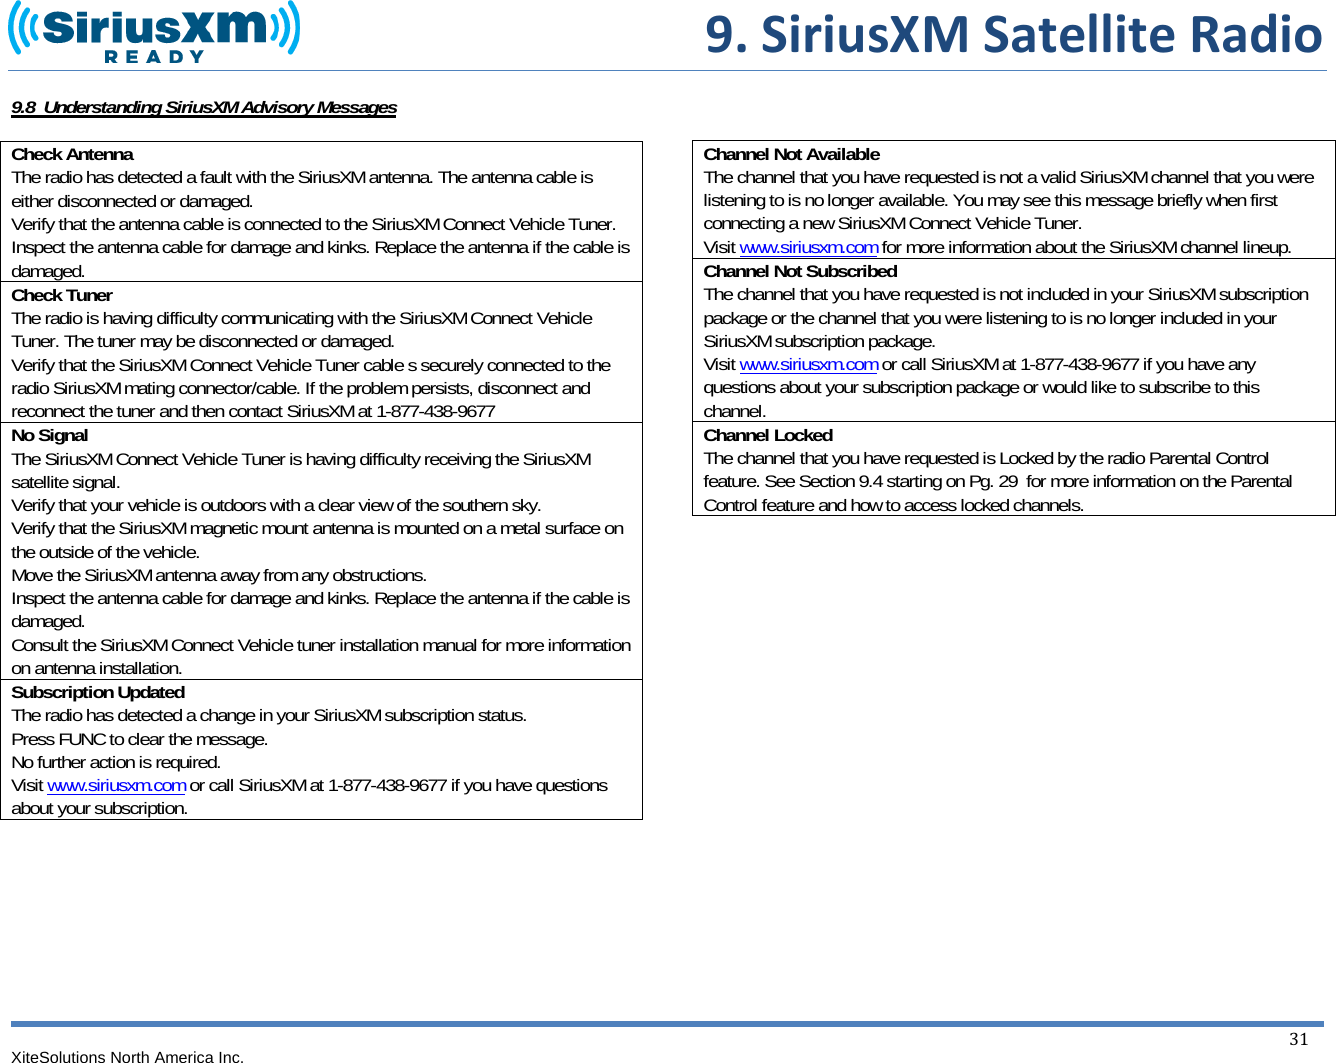  9.SiriusXMSatelliteRadioXiteSolutions North America Inc.  31 9.8  Understanding SiriusXM Advisory Messages  Check Antenna The radio has detected a fault with the SiriusXM antenna. The antenna cable is either disconnected or damaged.  Verify that the antenna cable is connected to the SiriusXM Connect Vehicle Tuner. Inspect the antenna cable for damage and kinks. Replace the antenna if the cable is damaged. Check Tuner The radio is having difficulty communicating with the SiriusXM Connect Vehicle Tuner. The tuner may be disconnected or damaged.  Verify that the SiriusXM Connect Vehicle Tuner cable s securely connected to the radio SiriusXM mating connector/cable. If the problem persists, disconnect and reconnect the tuner and then contact SiriusXM at 1-877-438-9677 No Signal The SiriusXM Connect Vehicle Tuner is having difficulty receiving the SiriusXM satellite signal. Verify that your vehicle is outdoors with a clear view of the southern sky. Verify that the SiriusXM magnetic mount antenna is mounted on a metal surface on the outside of the vehicle. Move the SiriusXM antenna away from any obstructions. Inspect the antenna cable for damage and kinks. Replace the antenna if the cable is damaged. Consult the SiriusXM Connect Vehicle tuner installation manual for more information on antenna installation. Subscription Updated The radio has detected a change in your SiriusXM subscription status. Press FUNC to clear the message. No further action is required. Visit www.siriusxm.com or call SiriusXM at 1-877-438-9677 if you have questions about your subscription.                     Channel Not Available  The channel that you have requested is not a valid SiriusXM channel that you were listening to is no longer available. You may see this message briefly when first connecting a new SiriusXM Connect Vehicle Tuner. Visit www.siriusxm.com for more information about the SiriusXM channel lineup. Channel Not Subscribed The channel that you have requested is not included in your SiriusXM subscription package or the channel that you were listening to is no longer included in your SiriusXM subscription package.  Visit www.siriusxm.com or call SiriusXM at 1-877-438-9677 if you have any questions about your subscription package or would like to subscribe to this channel. Channel Locked The channel that you have requested is Locked by the radio Parental Control feature. See Section 9.4 starting on Pg. 29  for more information on the Parental Control feature and how to access locked channels. 